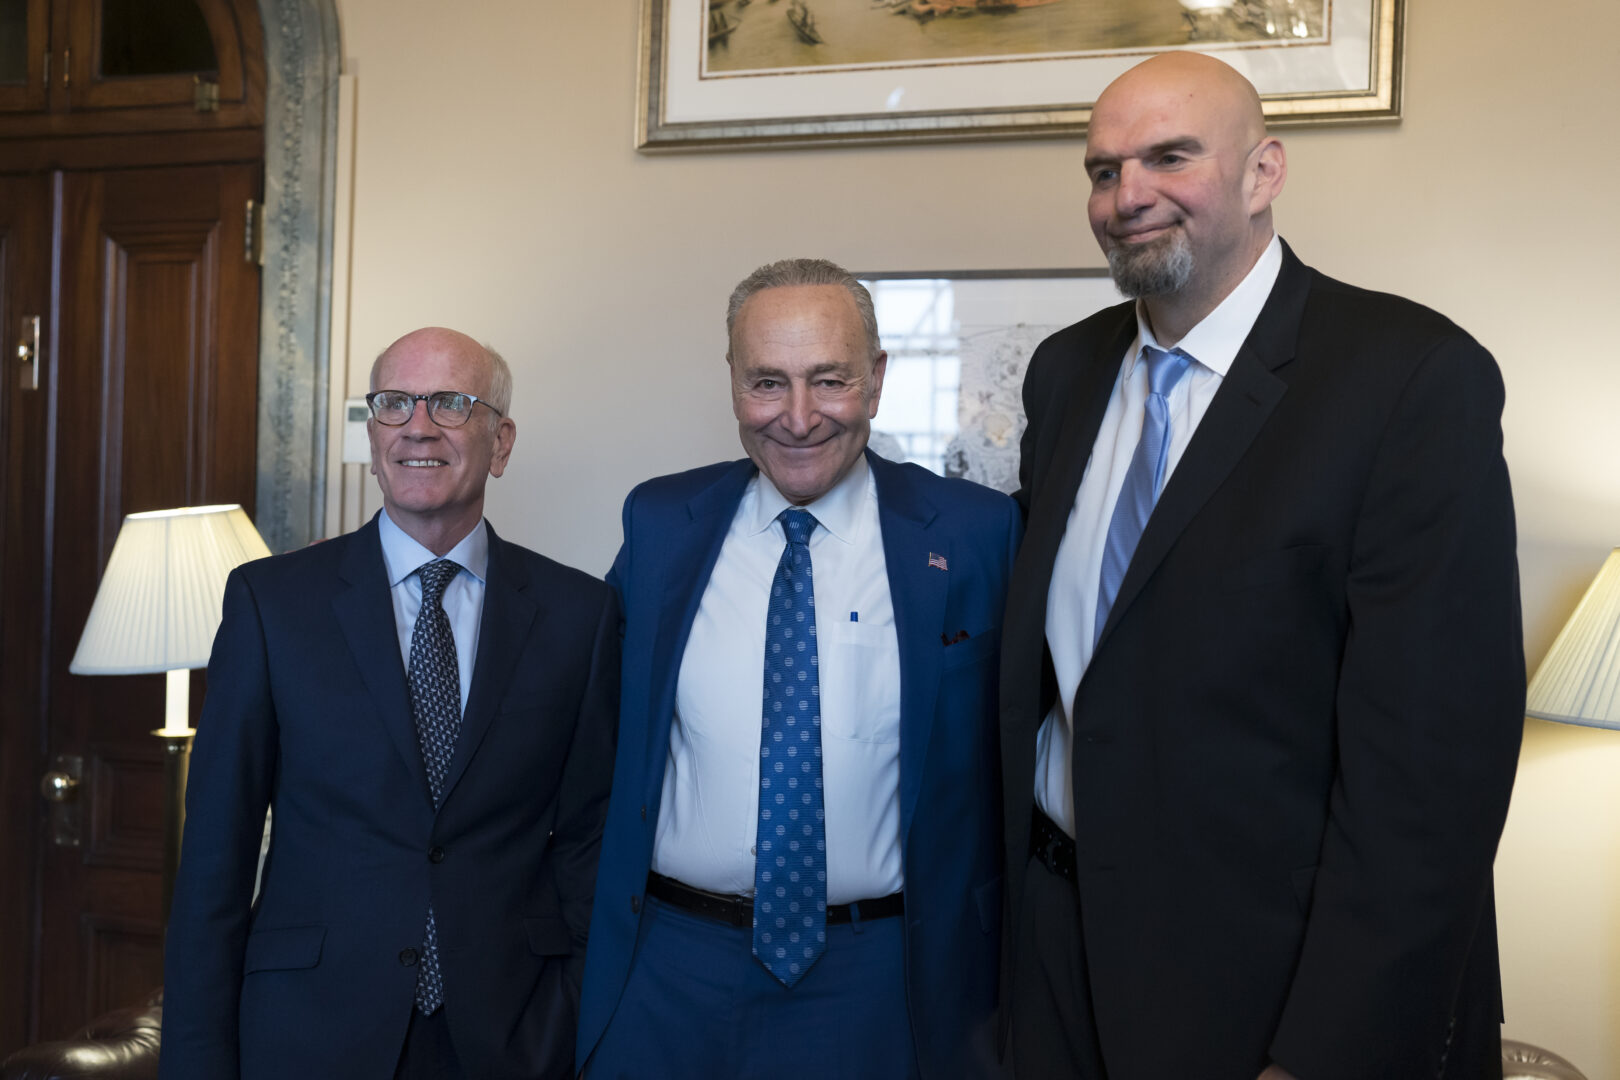 FILE - Senate Majority Leader Chuck Schumer, D-N.Y., center, welcomes Senator-elect Peter Welch, D-Vt., left, and Senator-elect John Fetterman, D-Pa., whose victories helped give Democrats the majority in the next Congress, at the Capitol in Washington, Tuesday, Nov. 15, 2022. (AP Photo/J. Scott Applewhite, File)